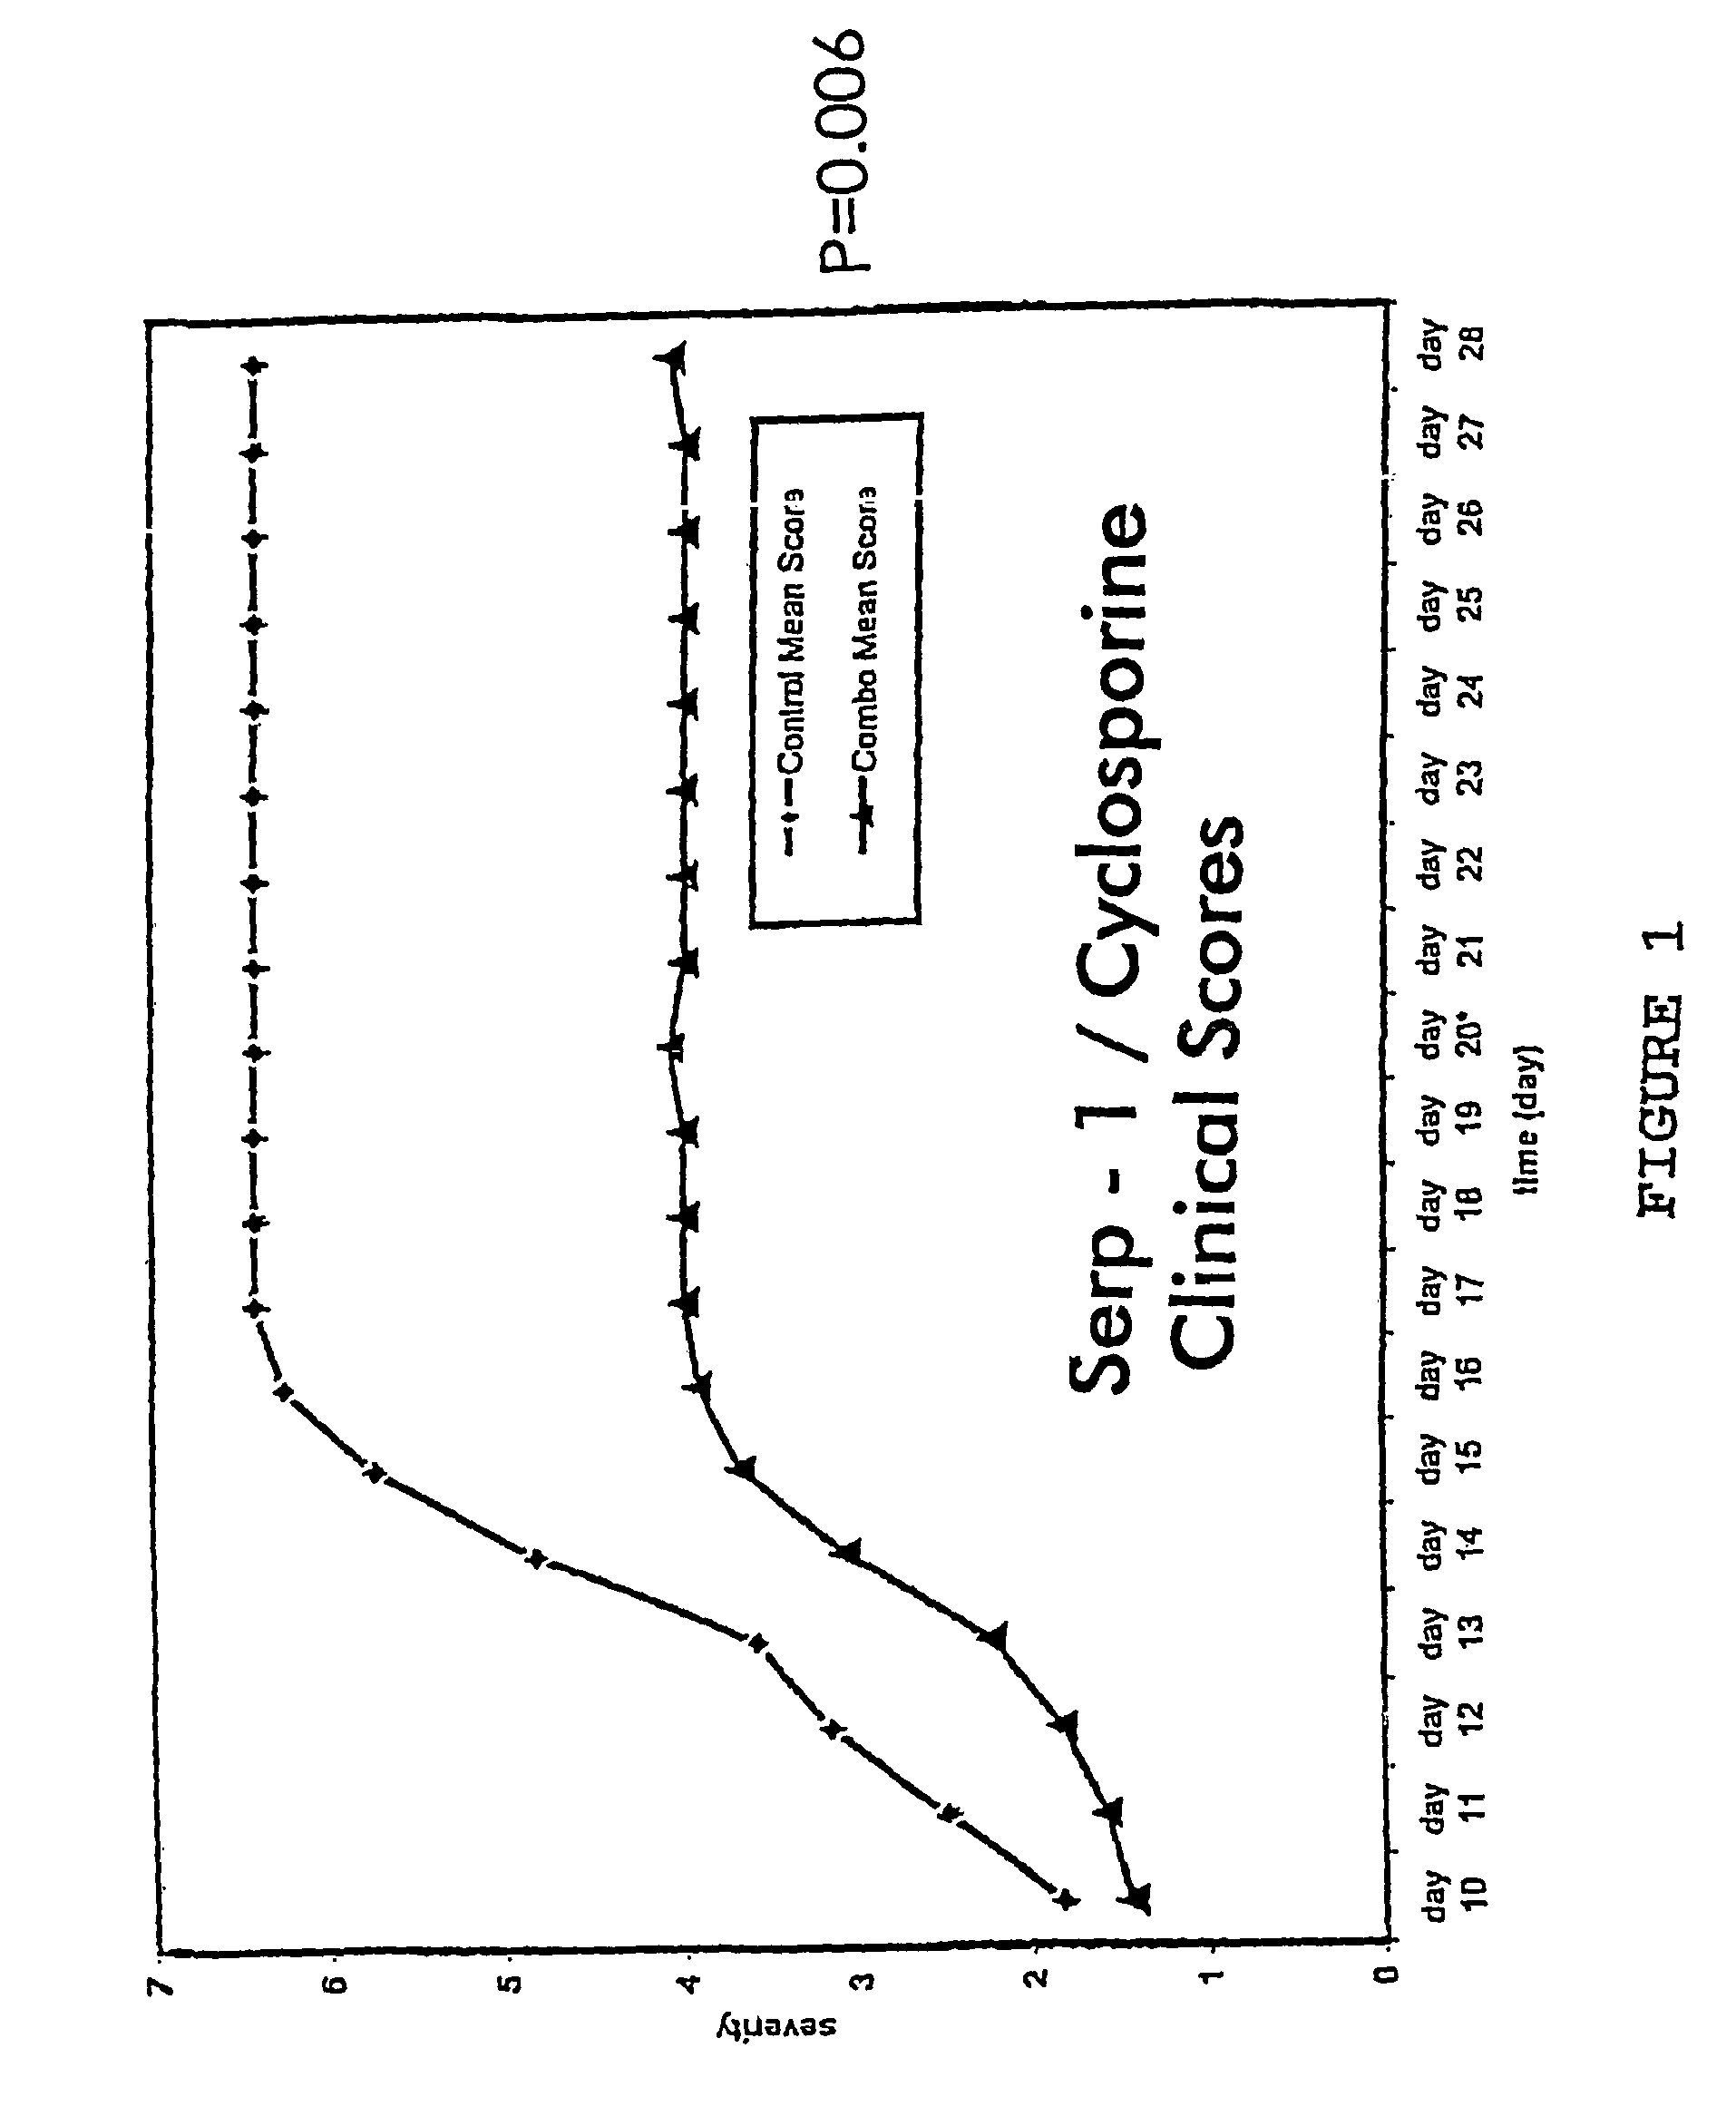 Method of treating arthritis with SERP-1 and an immunosuppressant